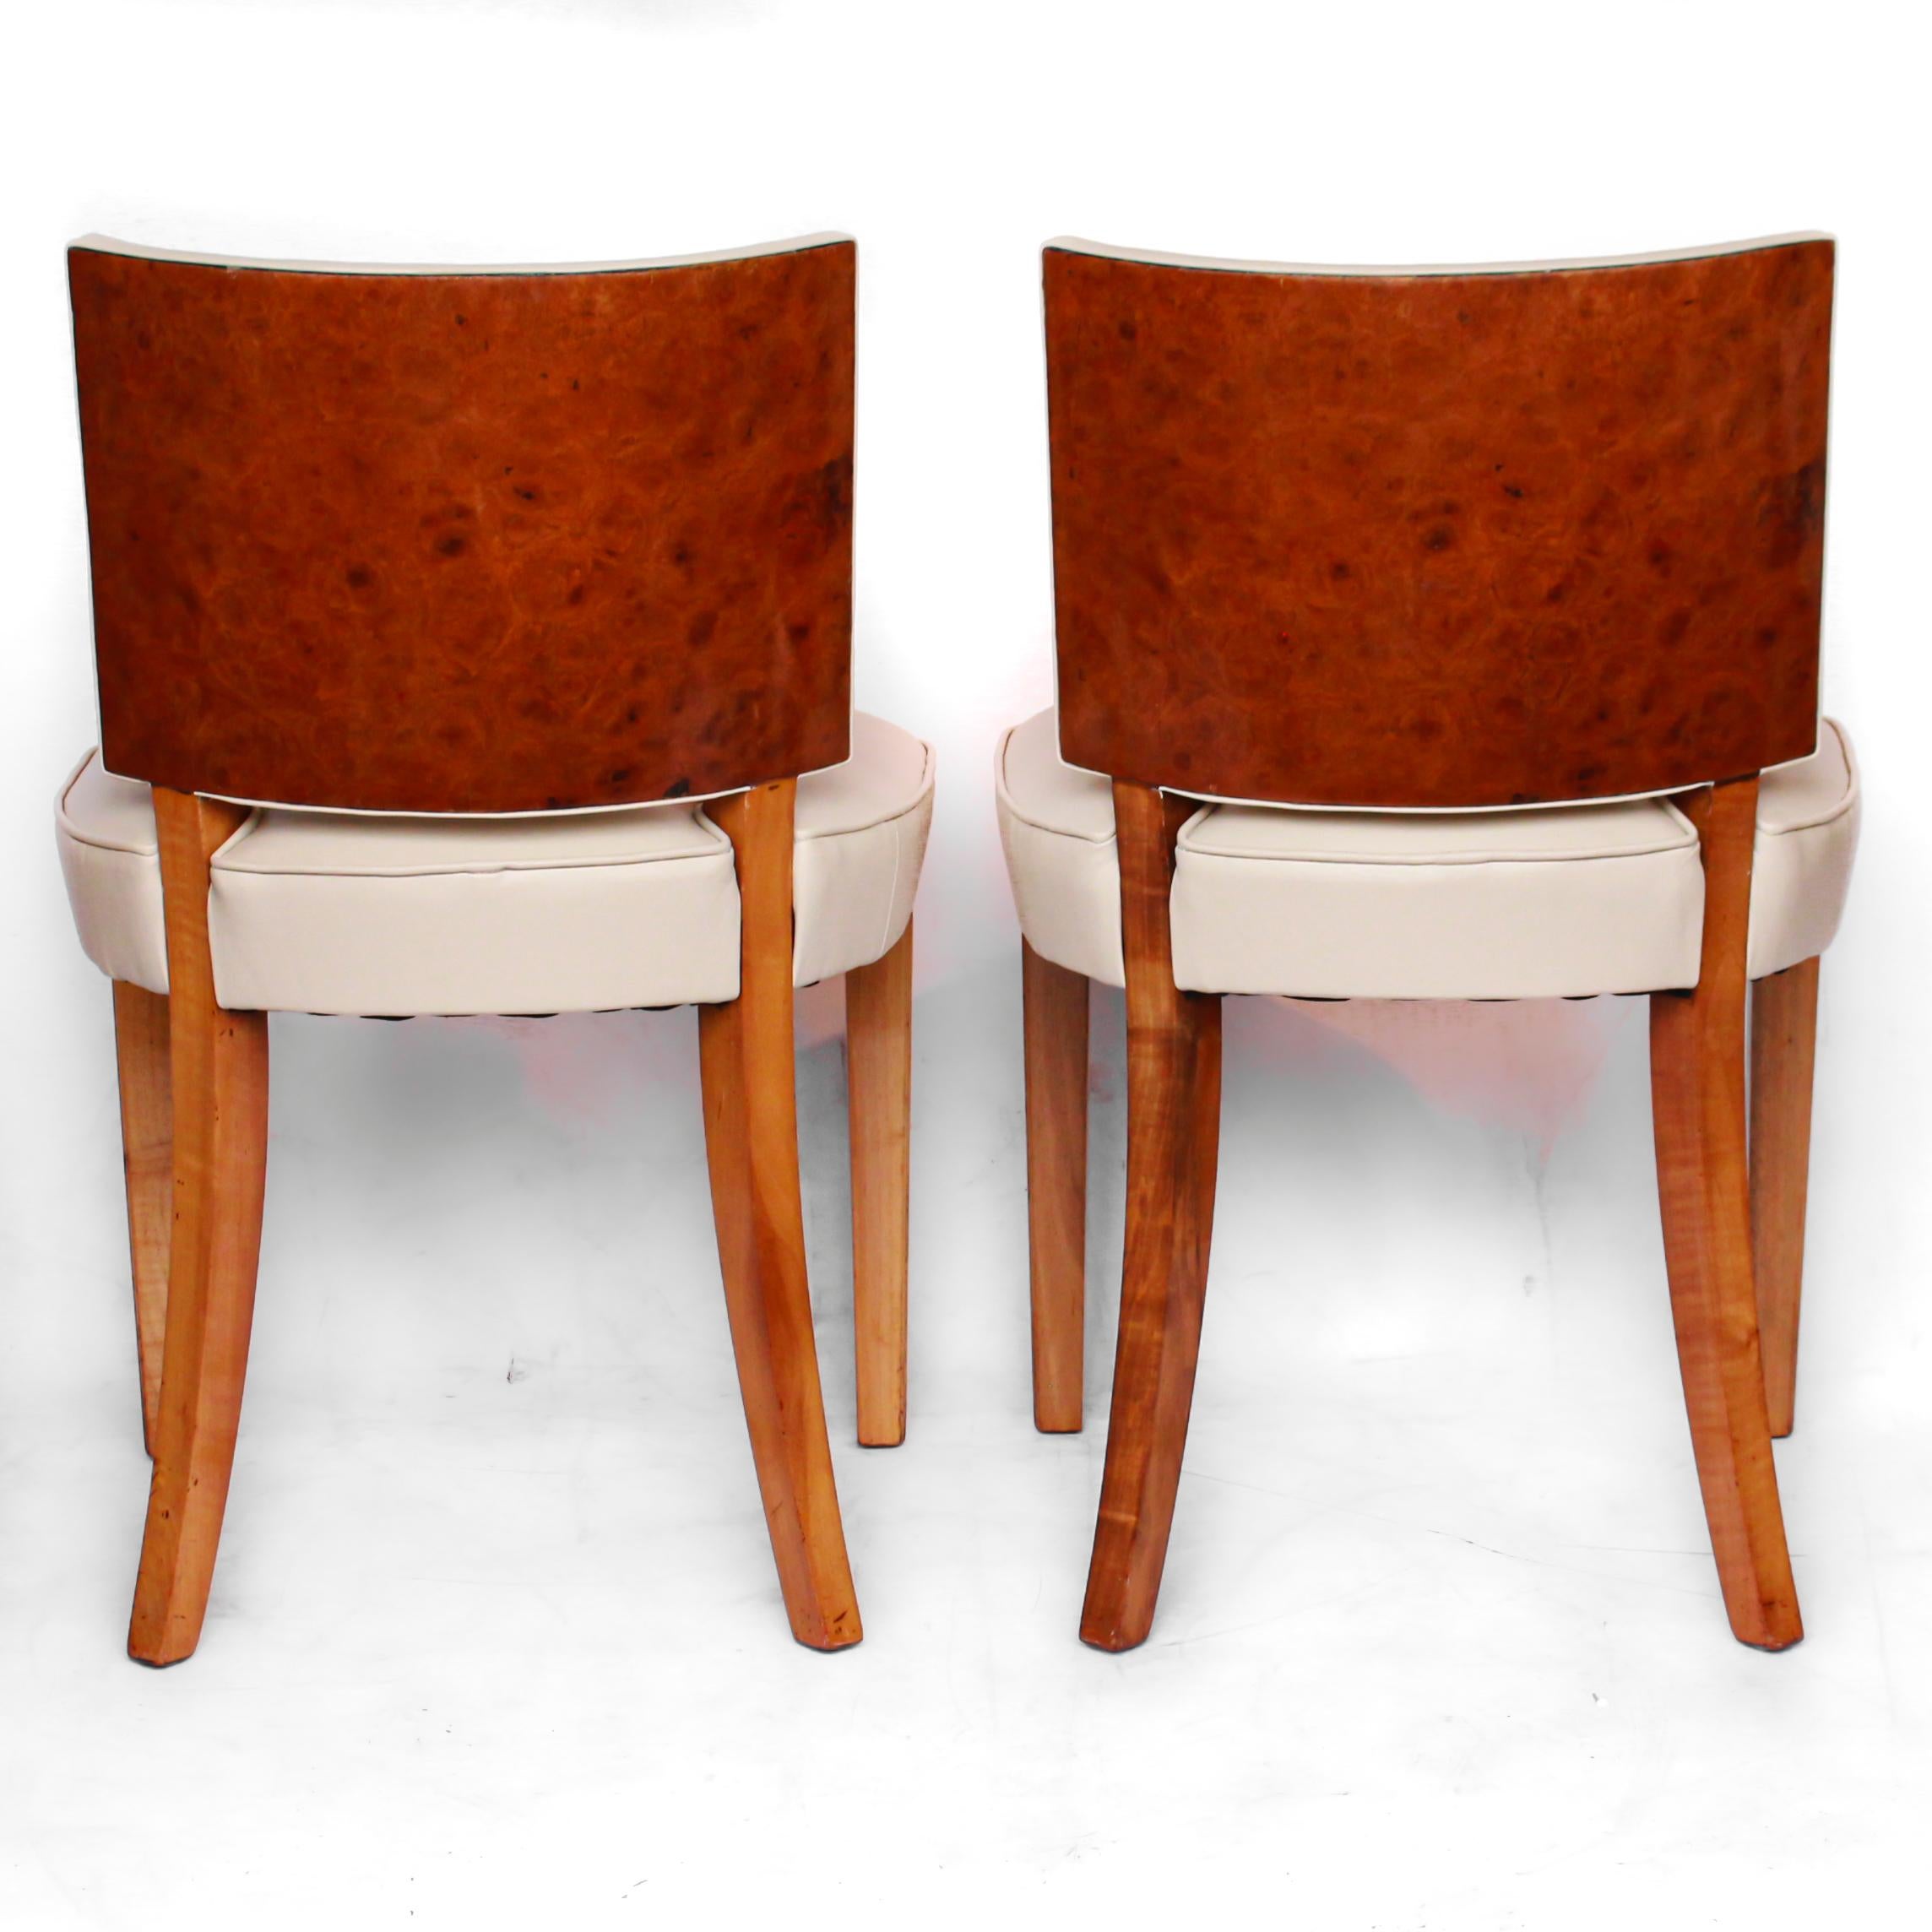 Mid-20th Century A Pair of Art Deco Side Chairs Solid and Veneered Walnut Cream Leather 1930's